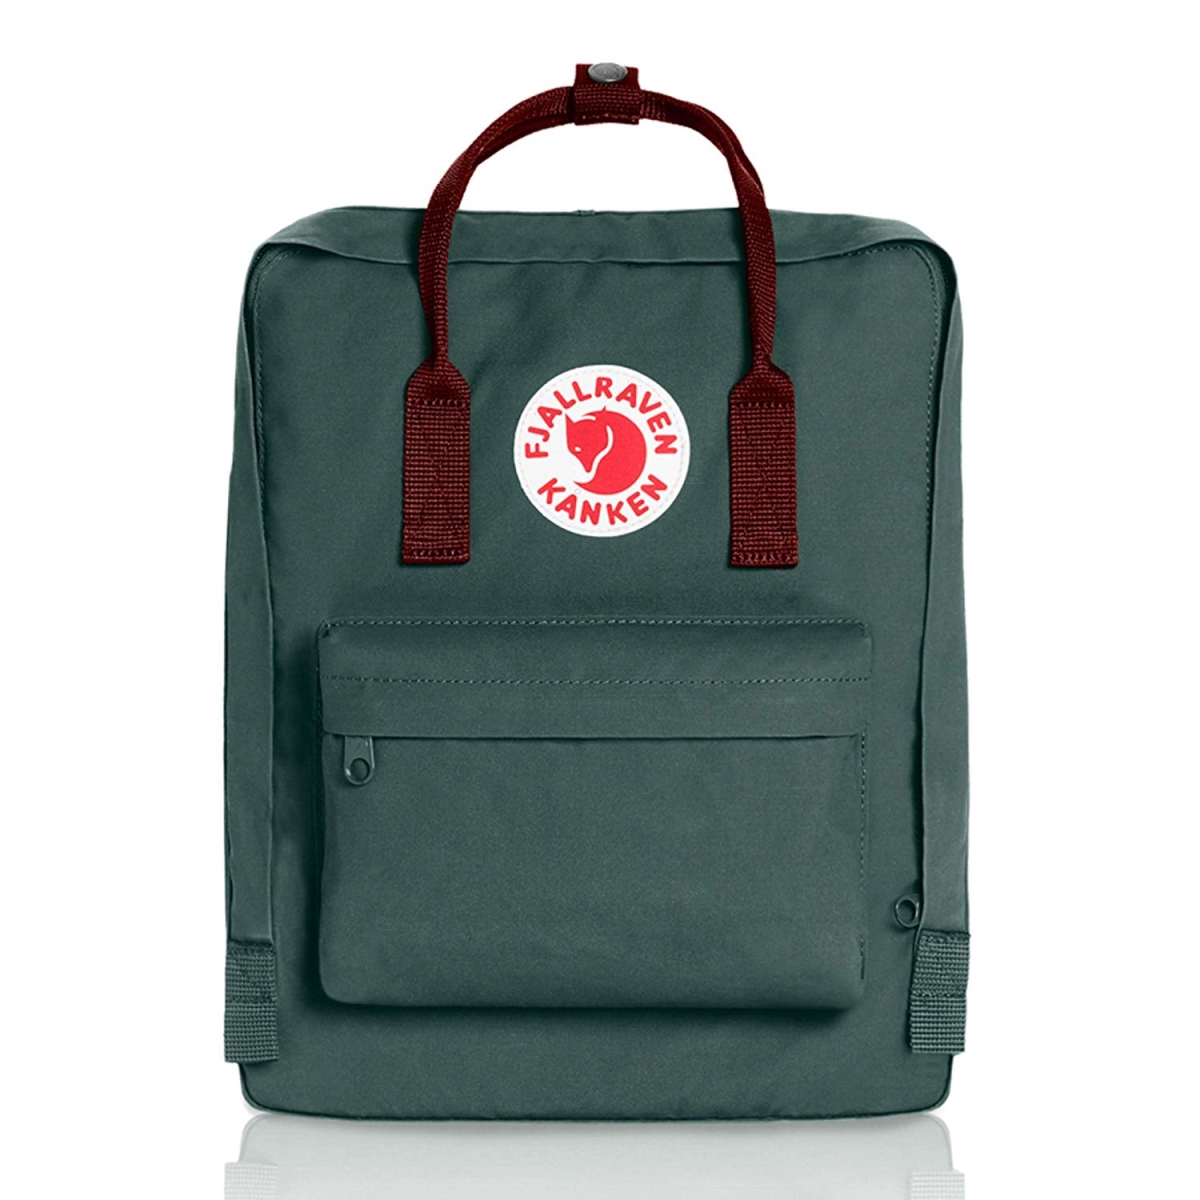 23510-660-326 38 Cm Kanken Classic Backpack For Everyday - Forest Green & Ox Red